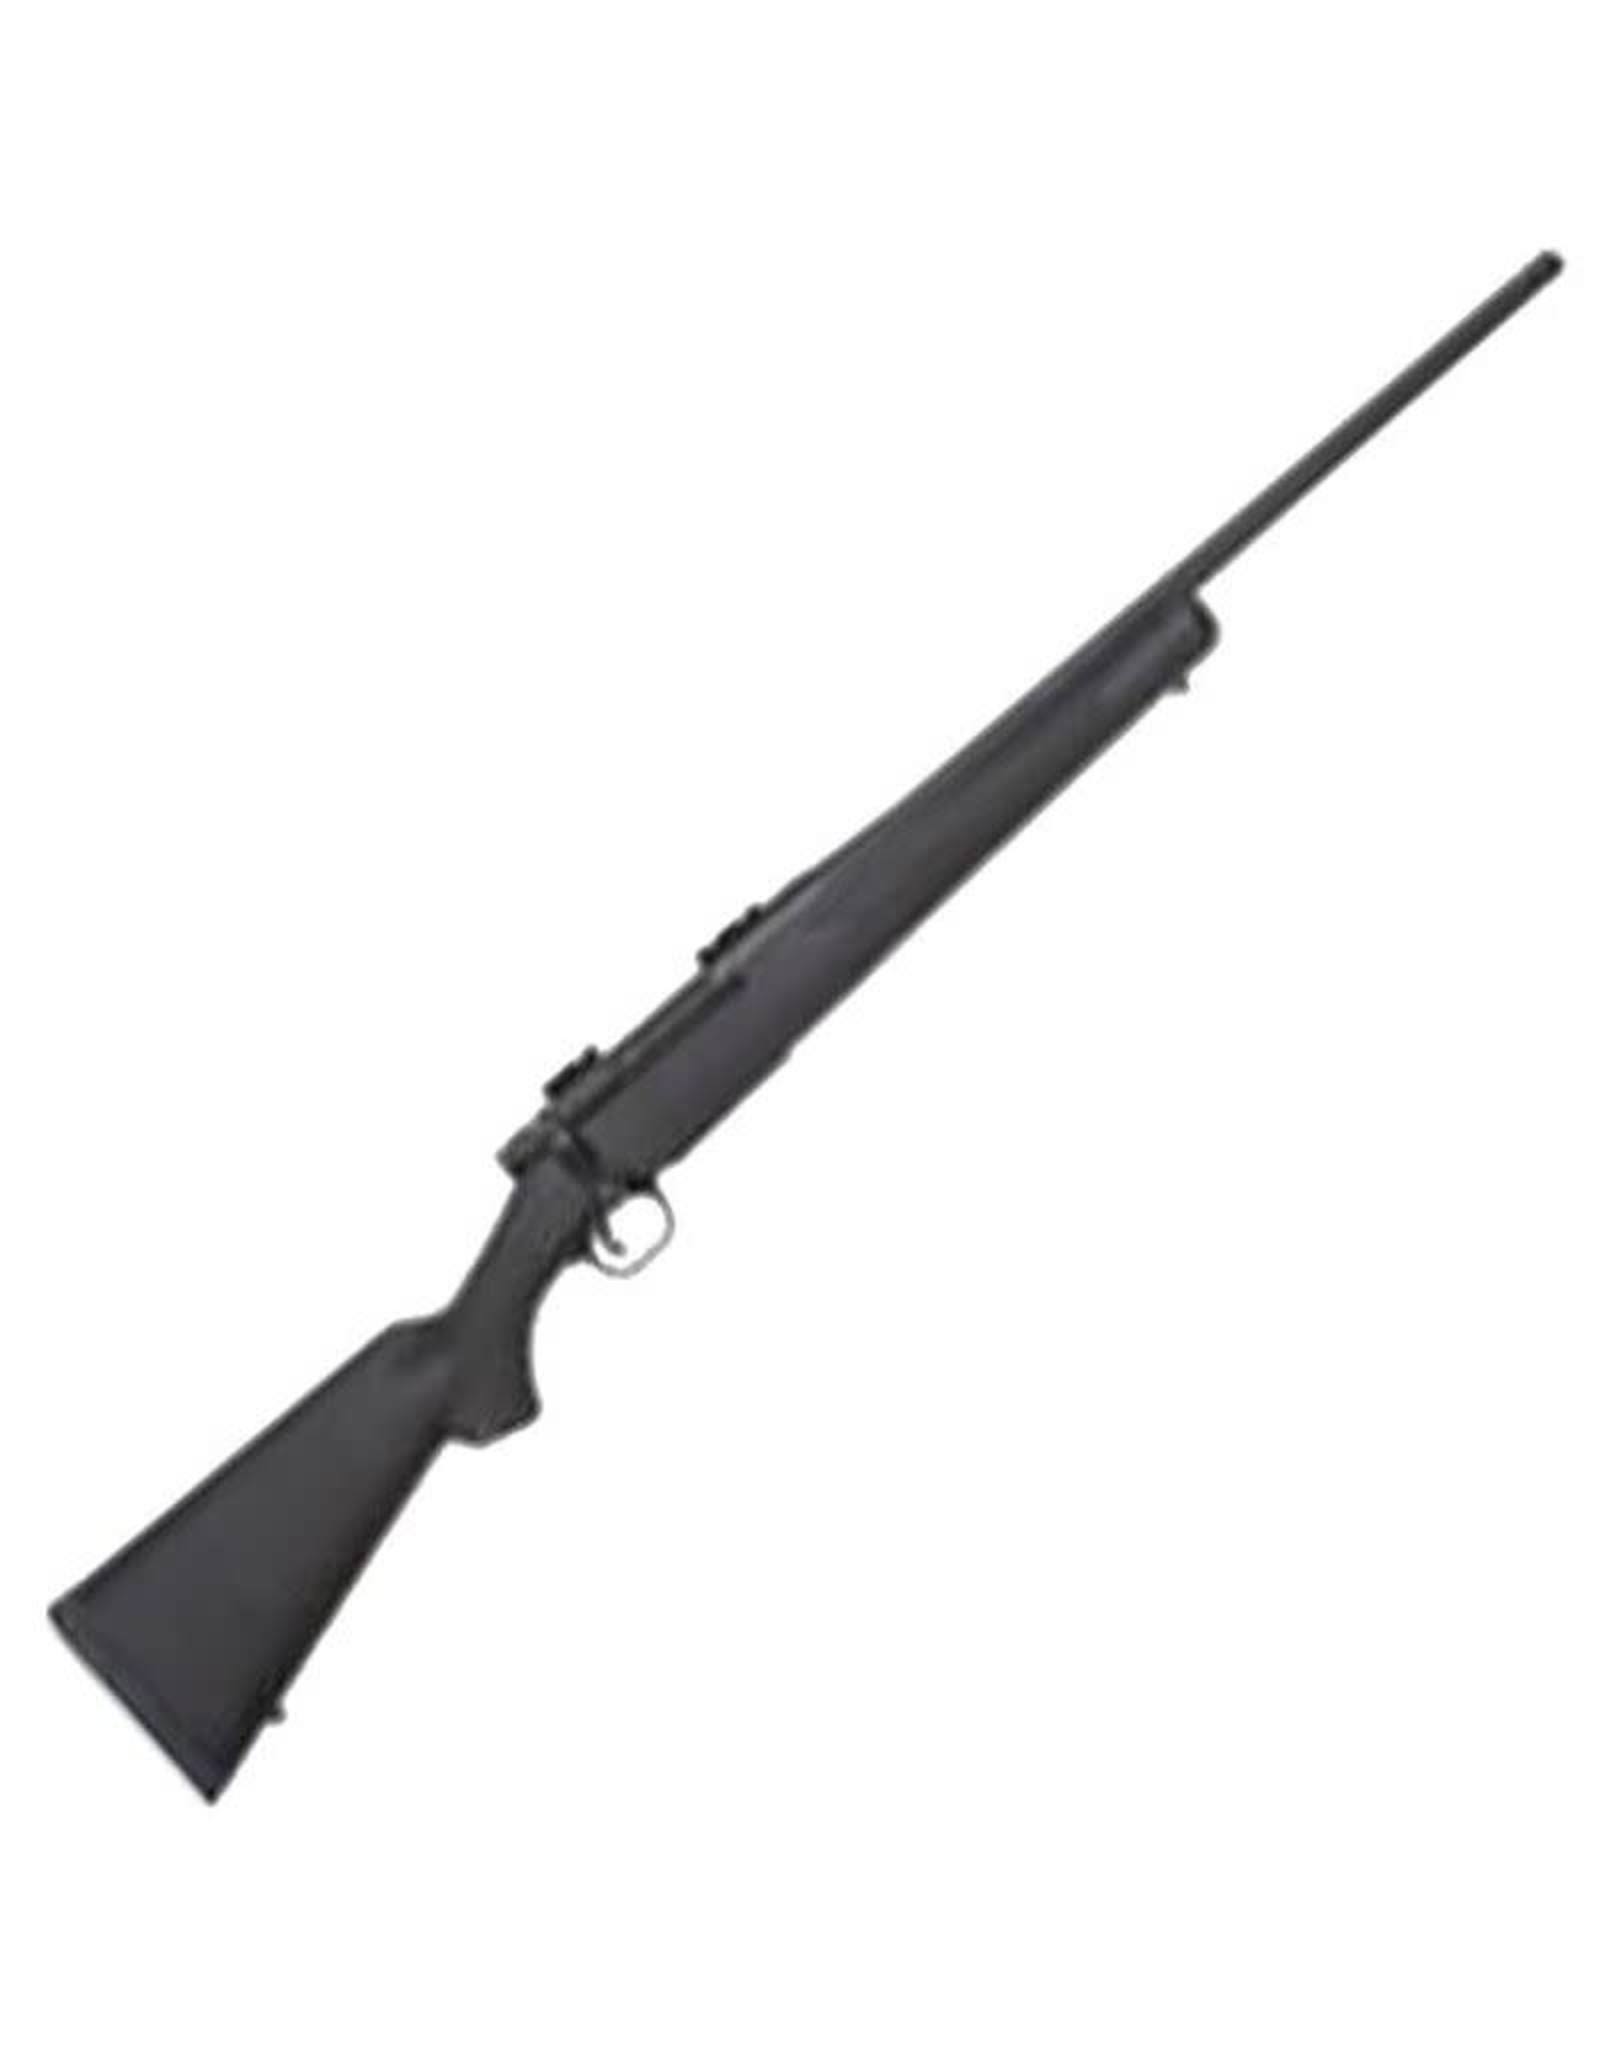 MOSSBERG MOSS PATRIOT SYNTHETIC